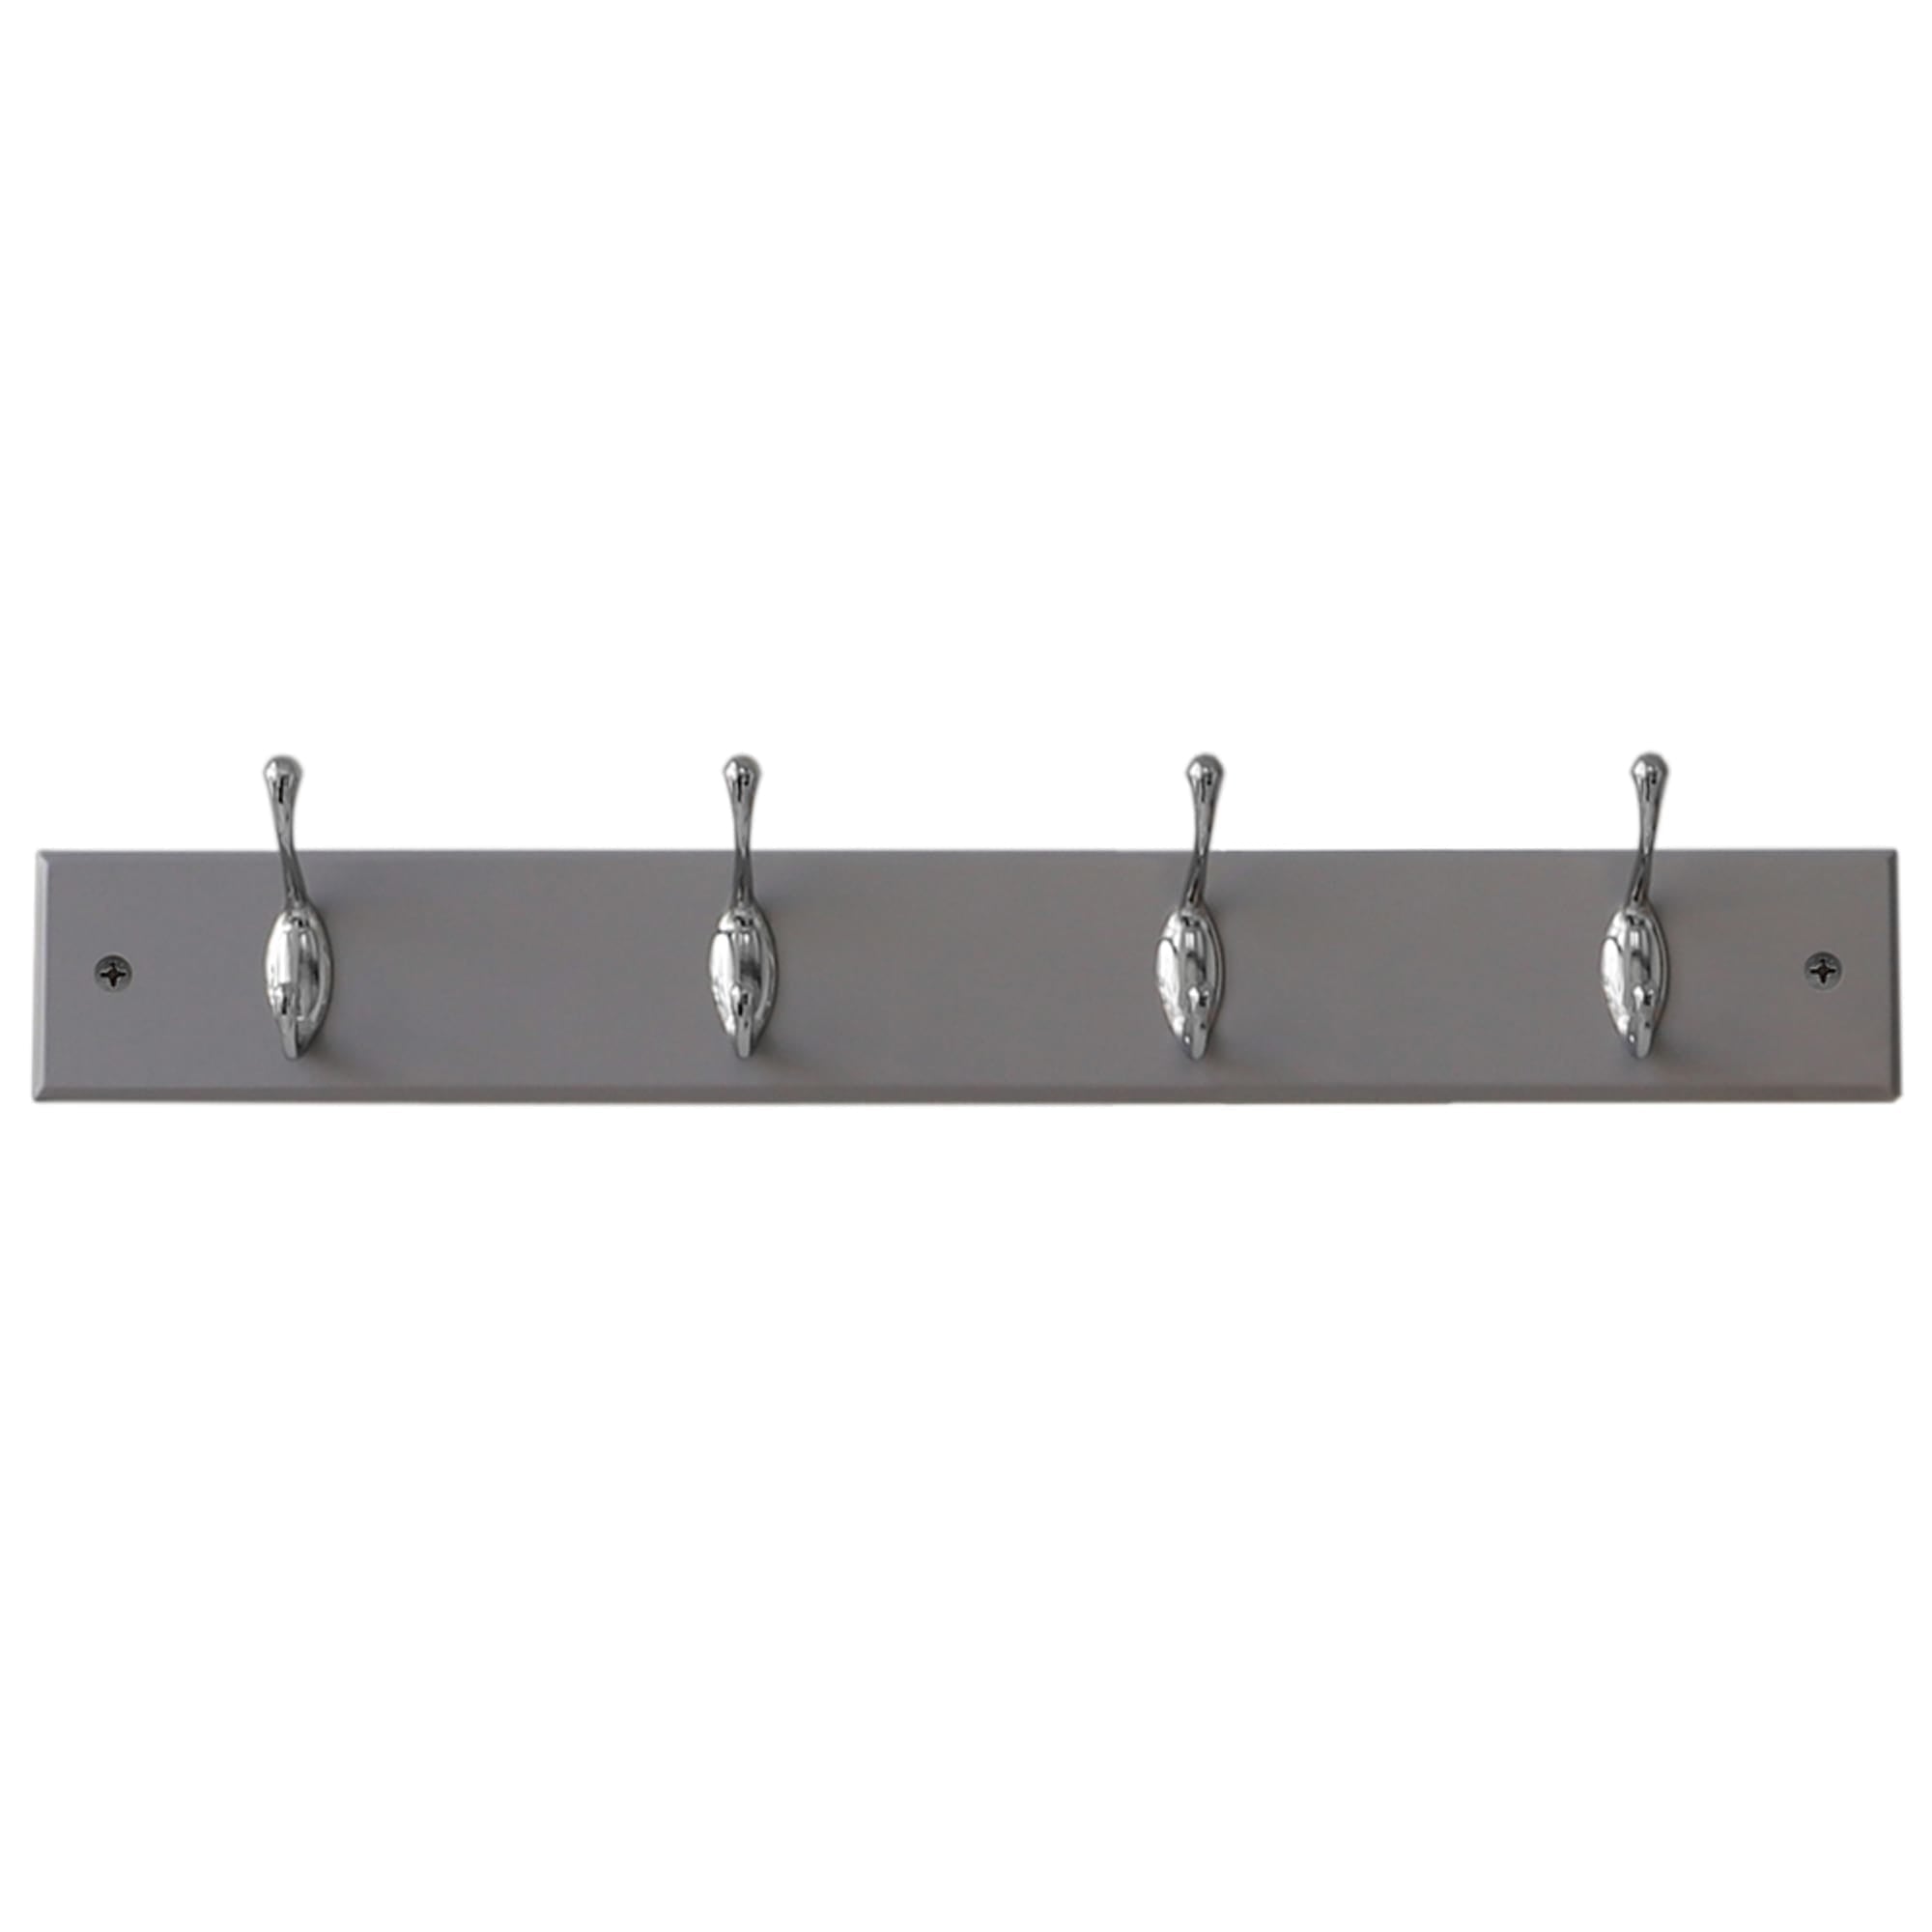 Home Basics 4 Double Hook Wall Mounted Hanging Rack, Grey $10.00 EACH, CASE PACK OF 12